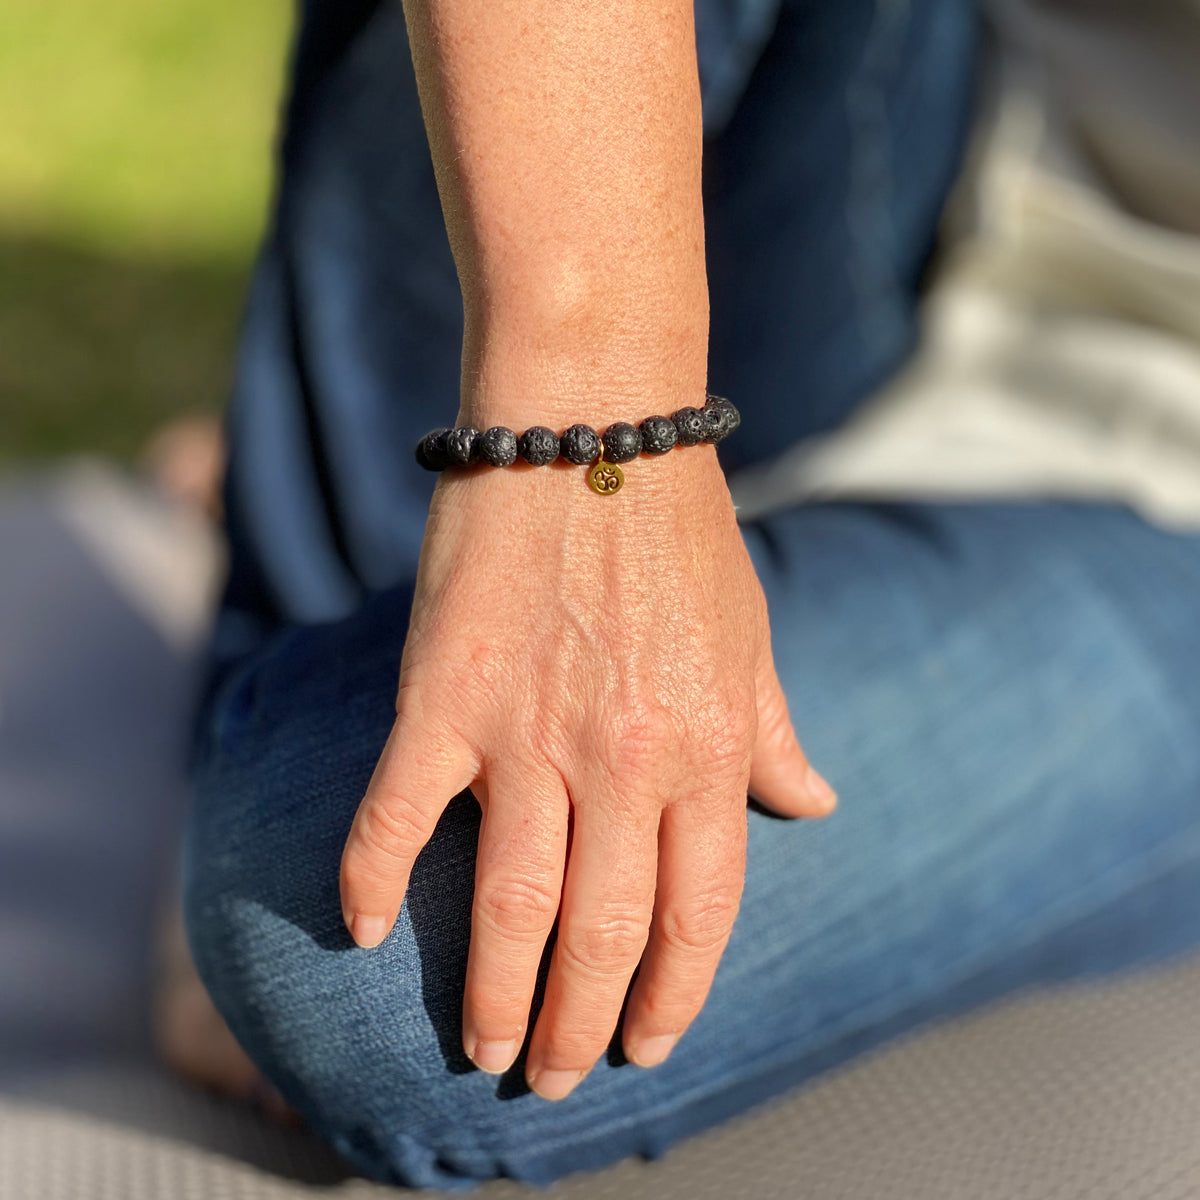 Yoga Inspired Lava Stone Bracelet with Ohm Charm to Hear the Sound of the Universe